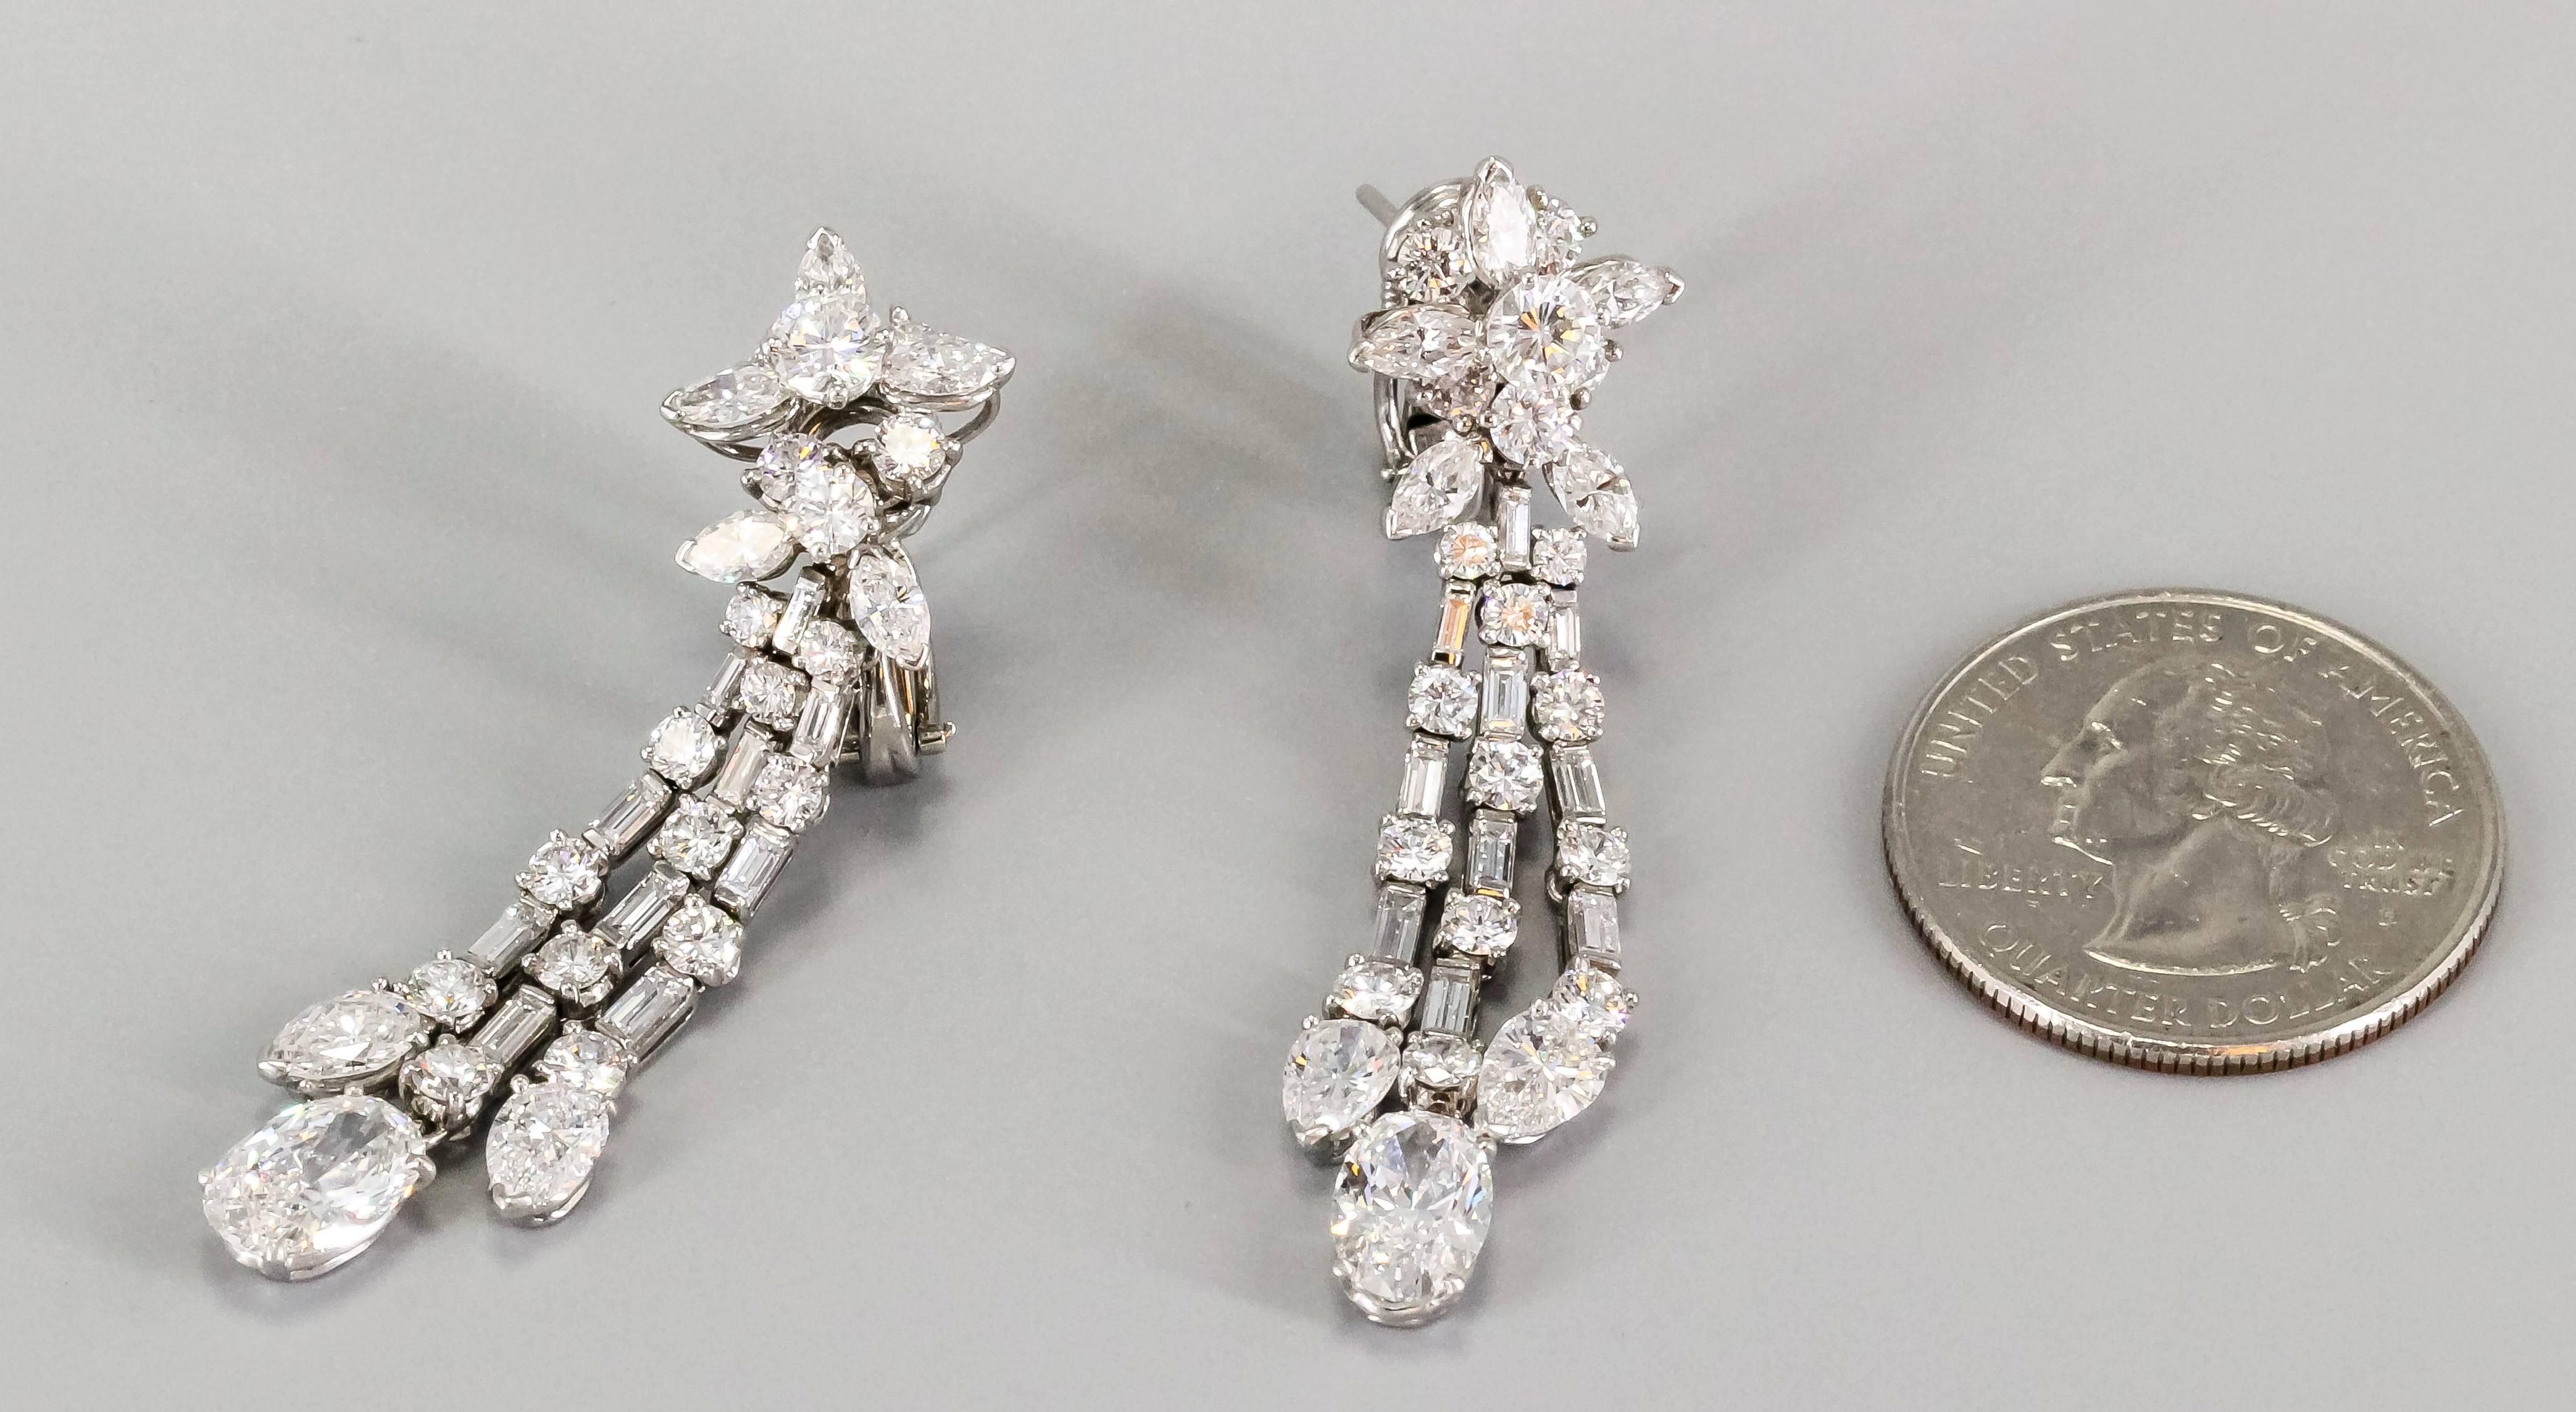 Impressive diamond and platinum ear pendants by Harry Winston, circa 1960s. These wonderful pendant earrings feature very high grade pear, marquise, round and baguette cut diamonds. Overall approx. 10-12cts total weight, ranging from E to F color,